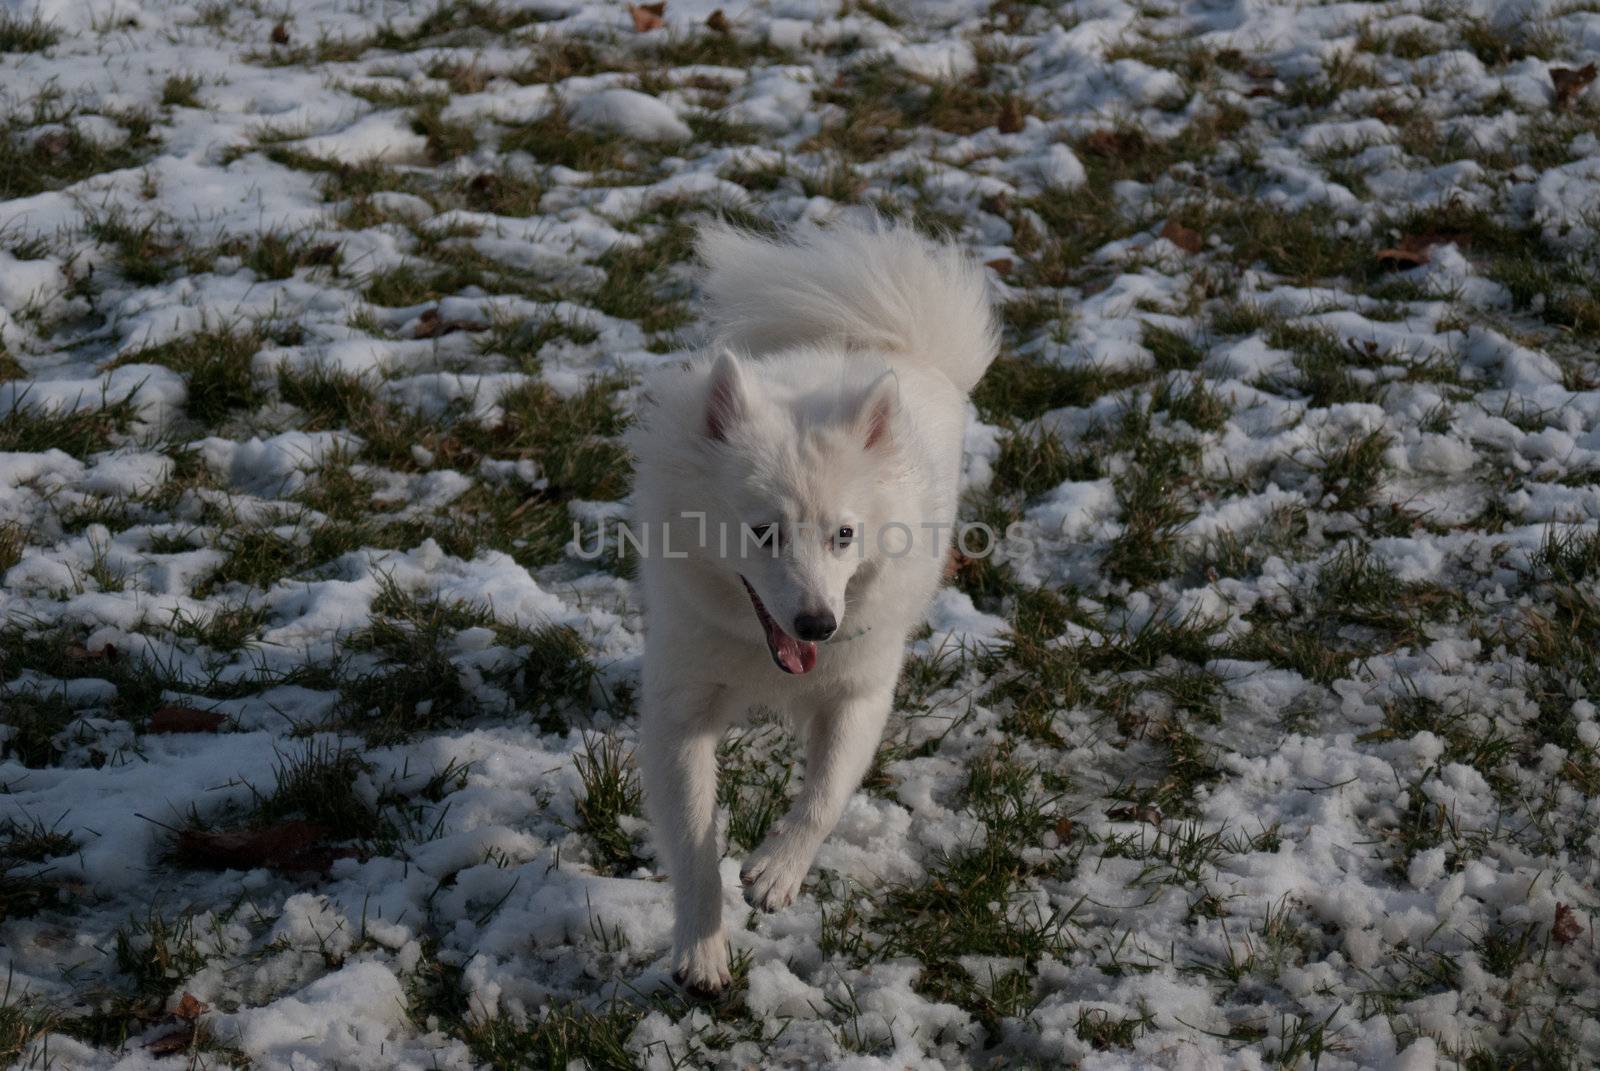 An American Eskimo puppy is happy playing and running through fresh snow.